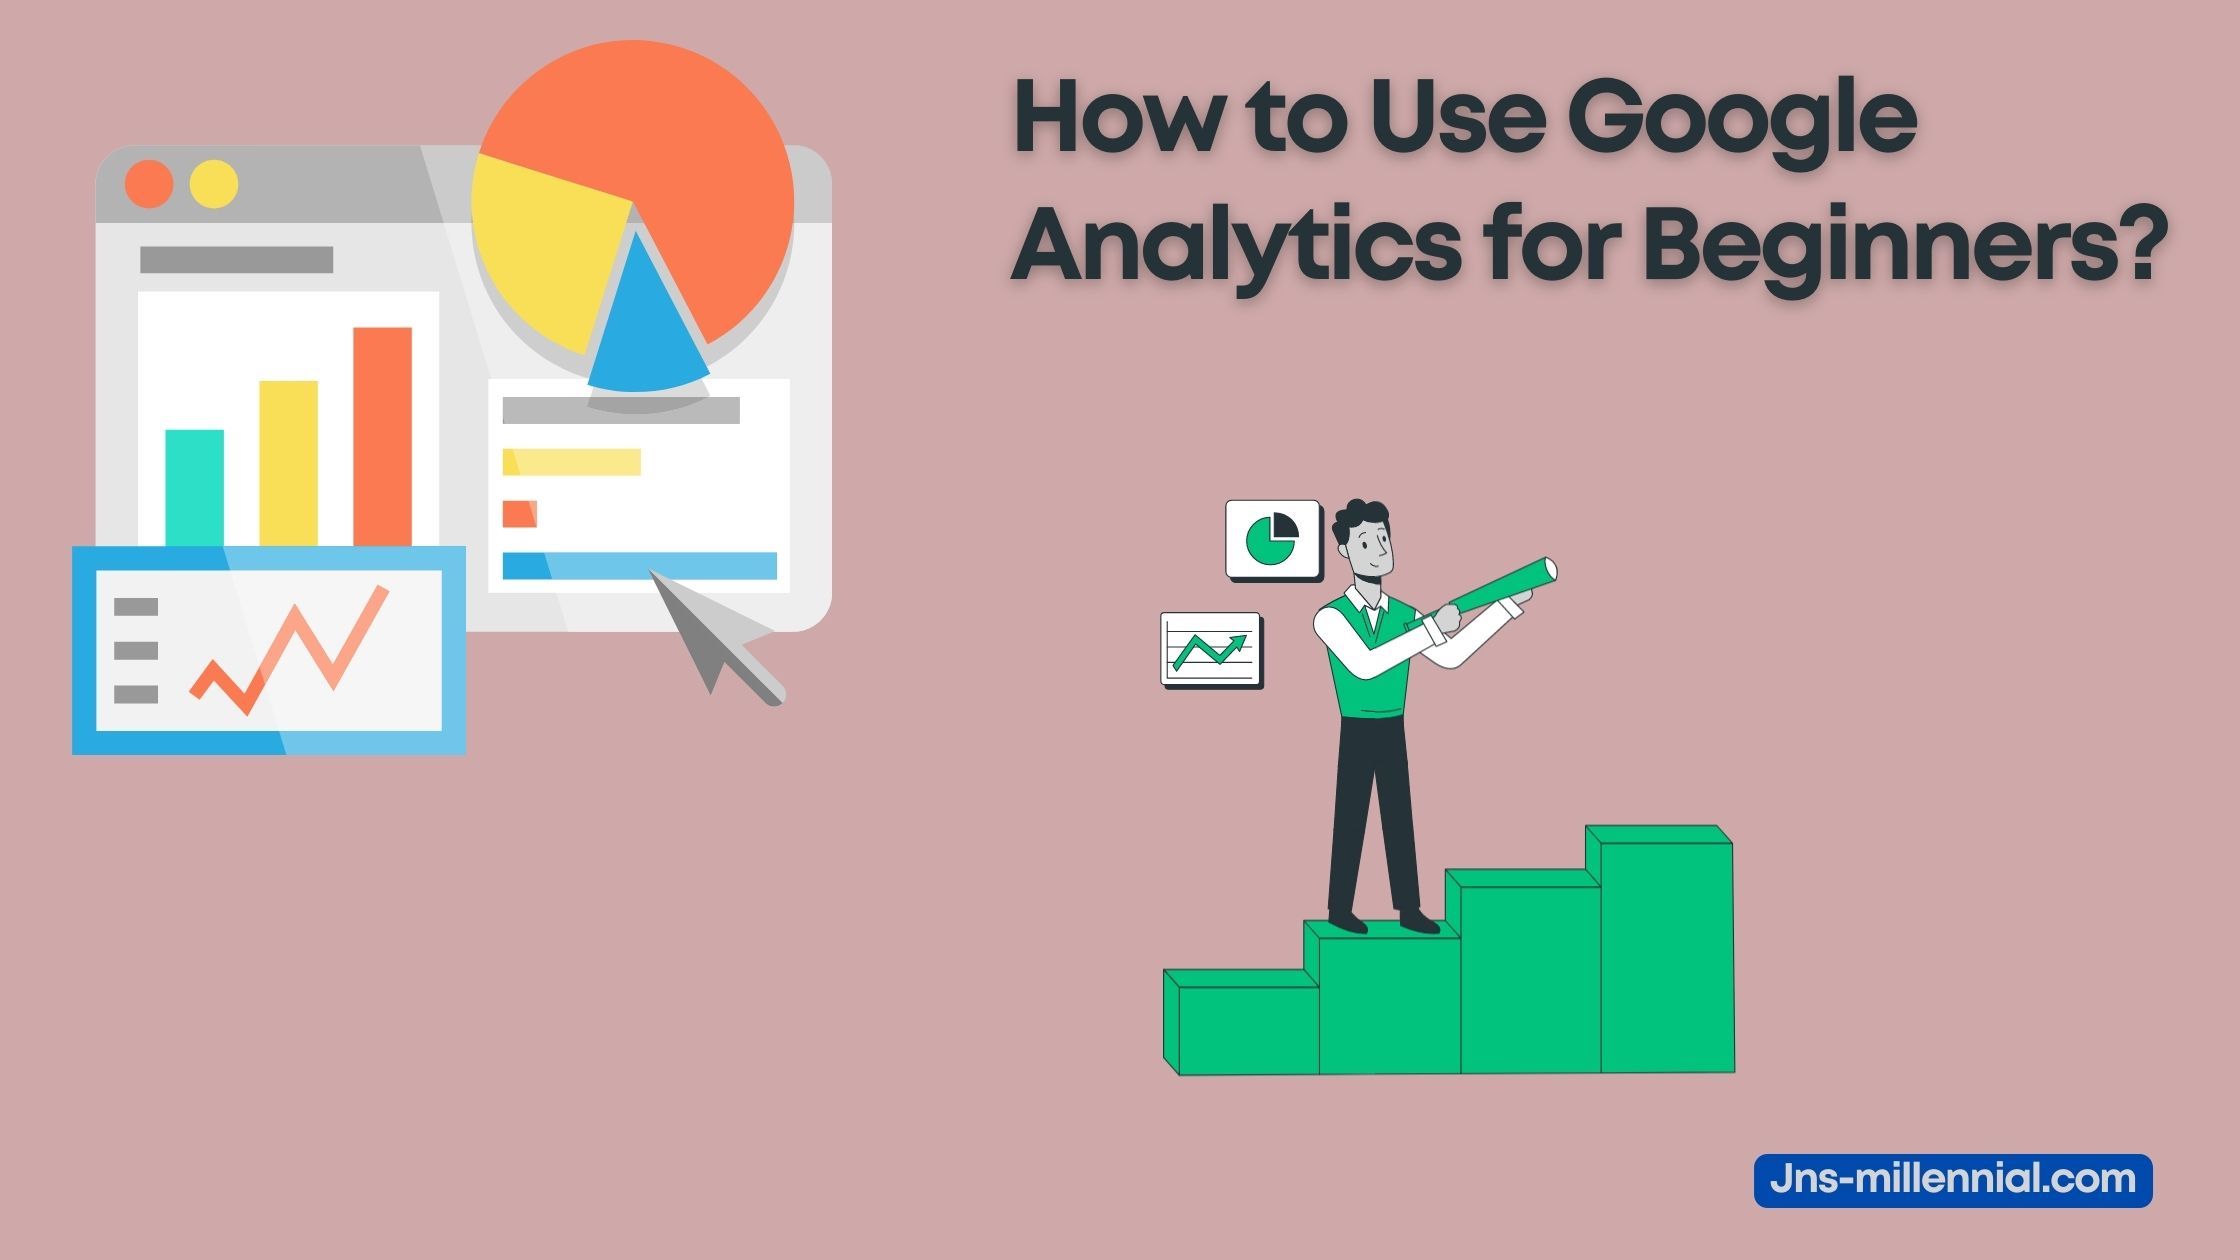 How to Use Google Analytics for Beginners